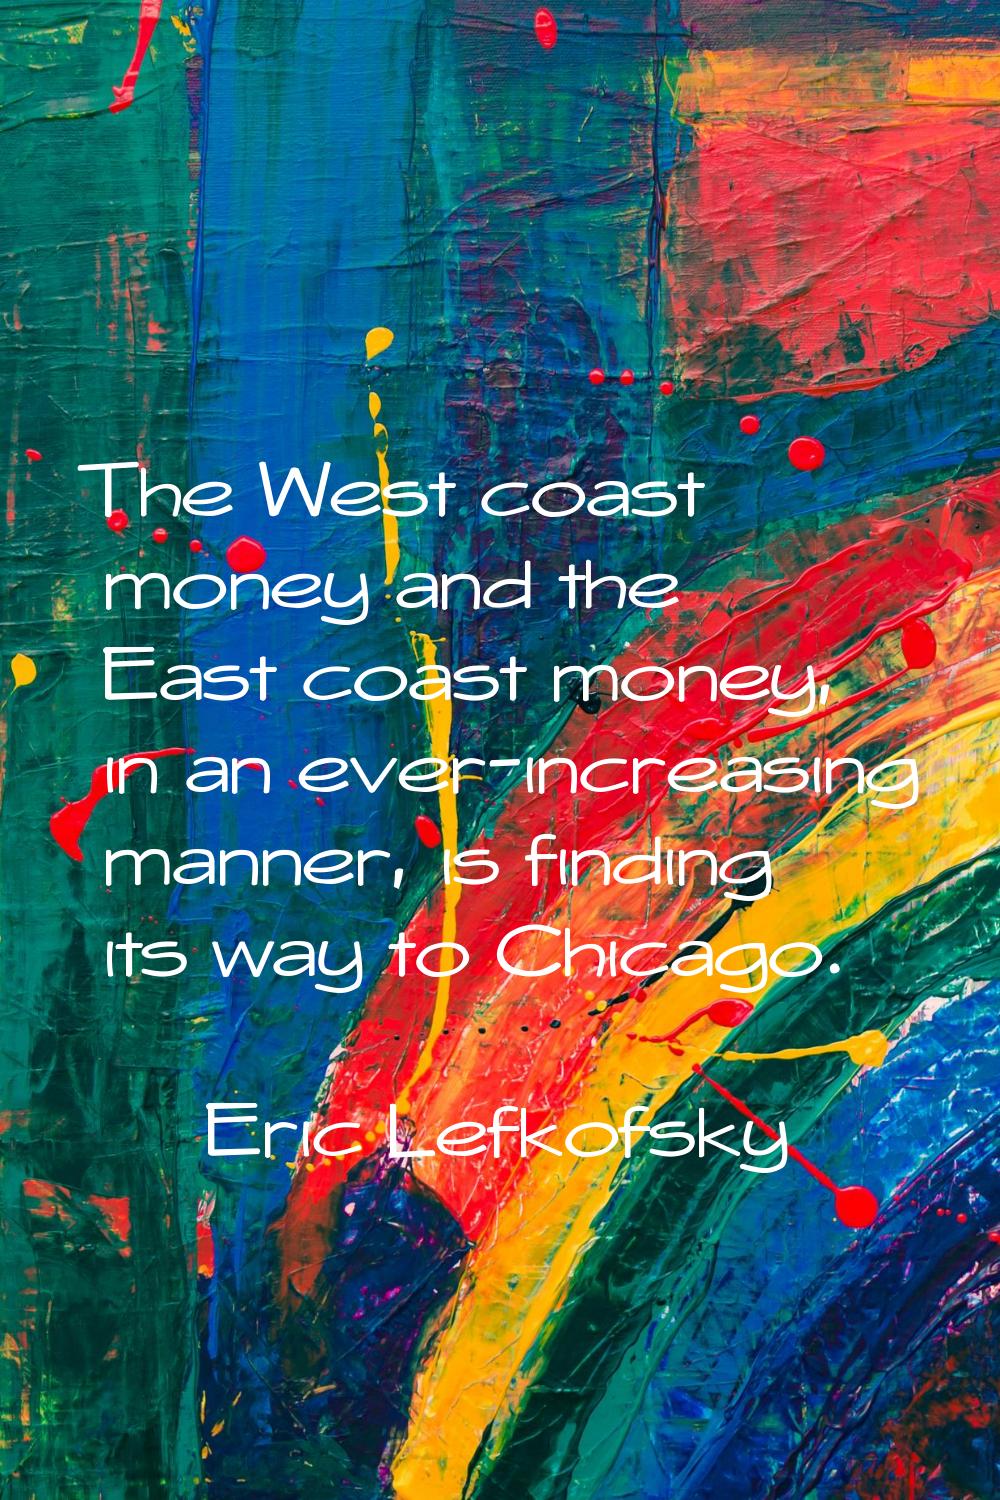 The West coast money and the East coast money, in an ever-increasing manner, is finding its way to 